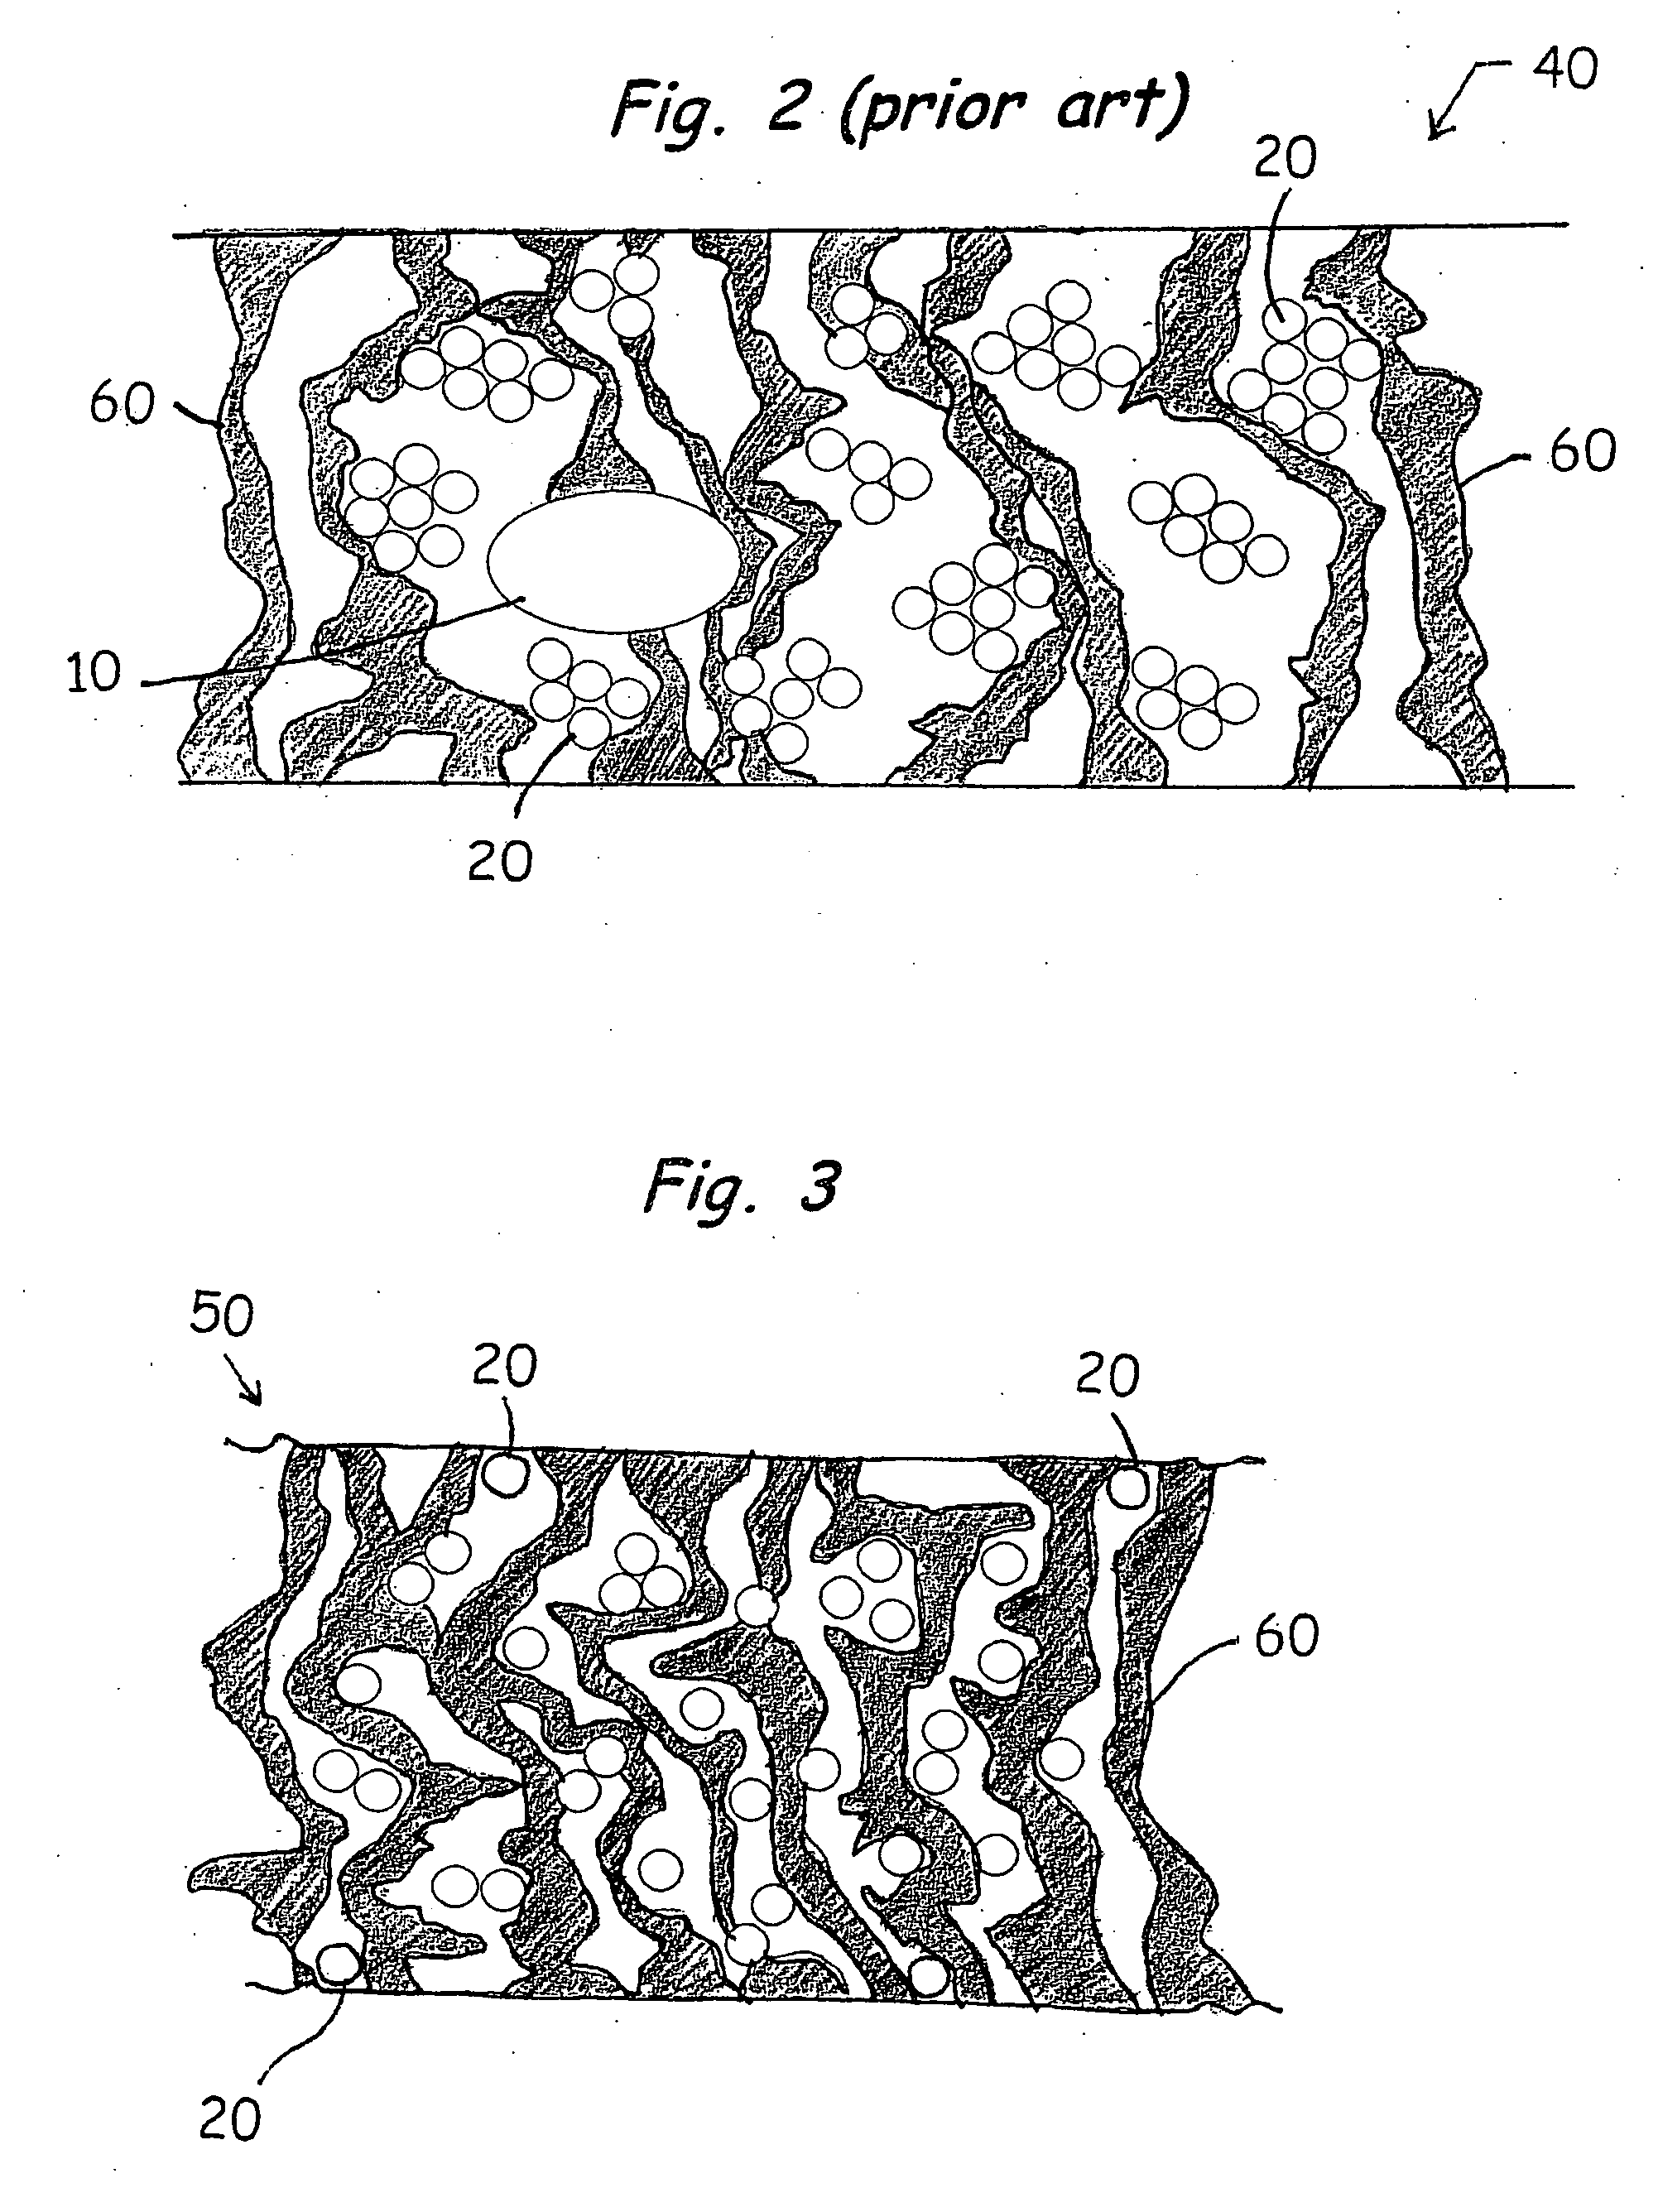 Lead acid battery separator with improved electrical and mechanical properties